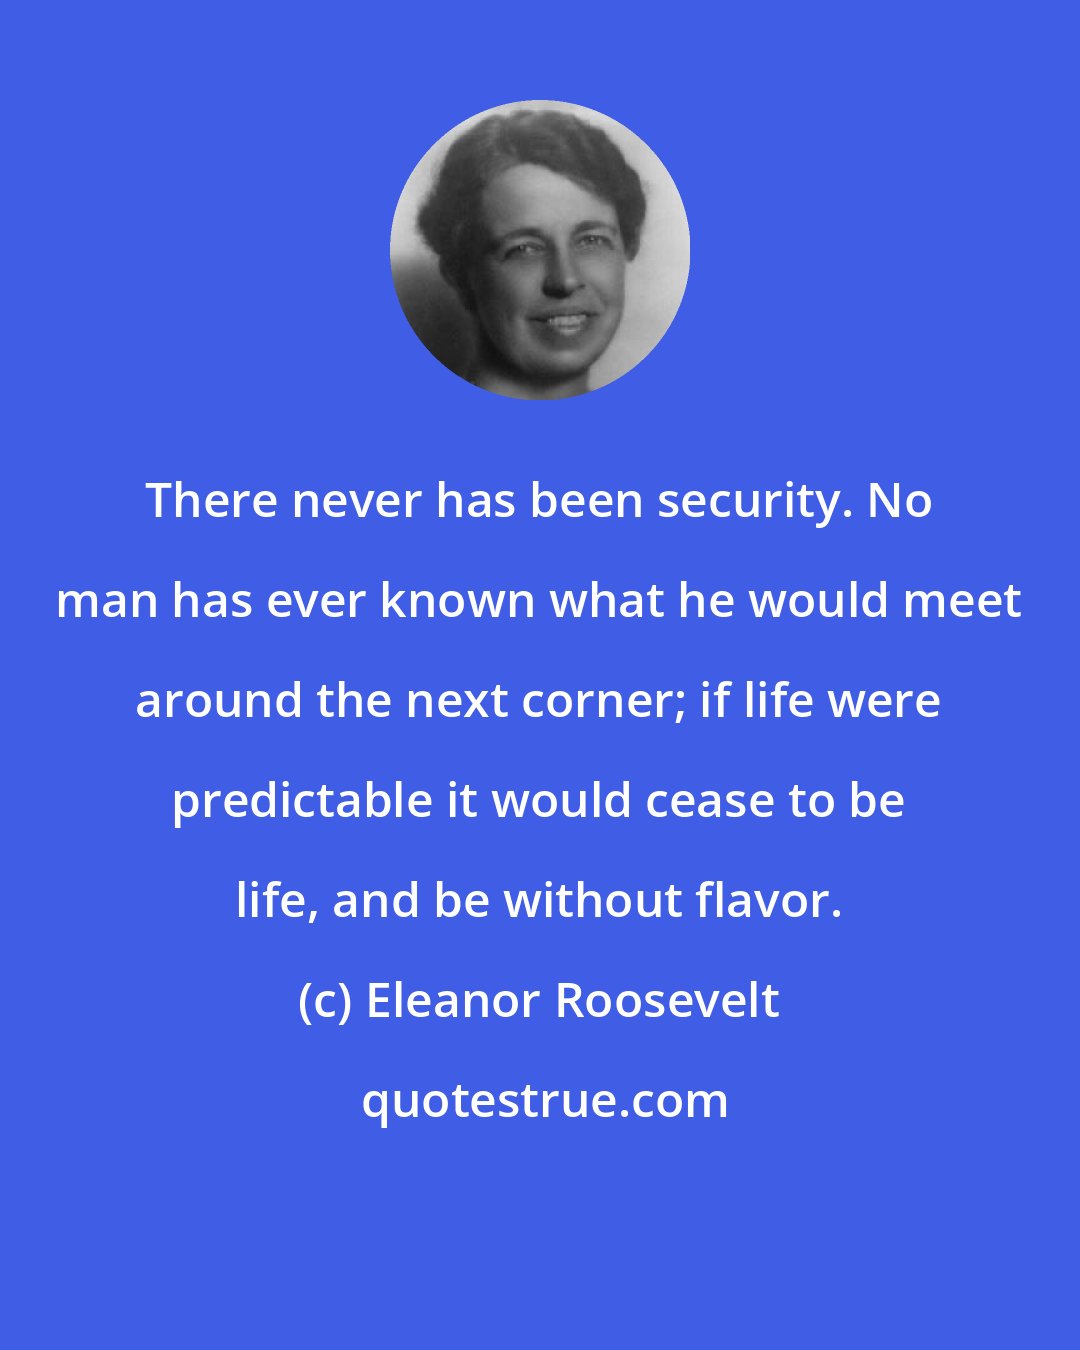 Eleanor Roosevelt: There never has been security. No man has ever known what he would meet around the next corner; if life were predictable it would cease to be life, and be without flavor.